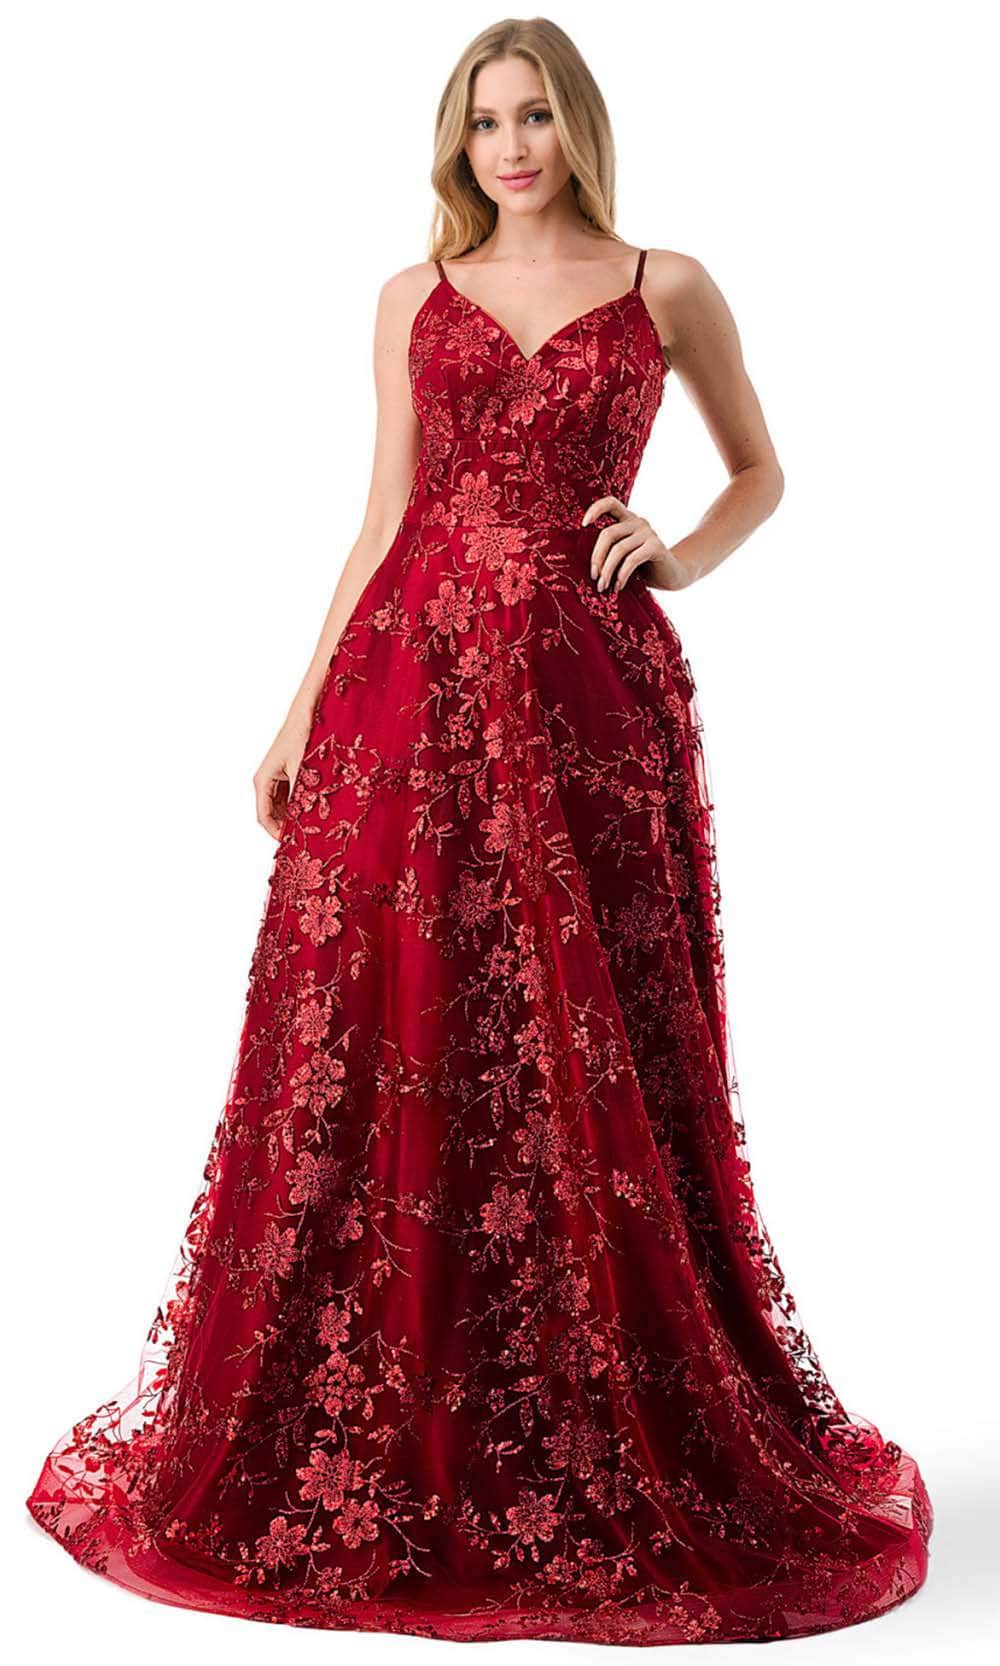 Image of Aspeed Design L2764B - Floral Tulle Prom Dress